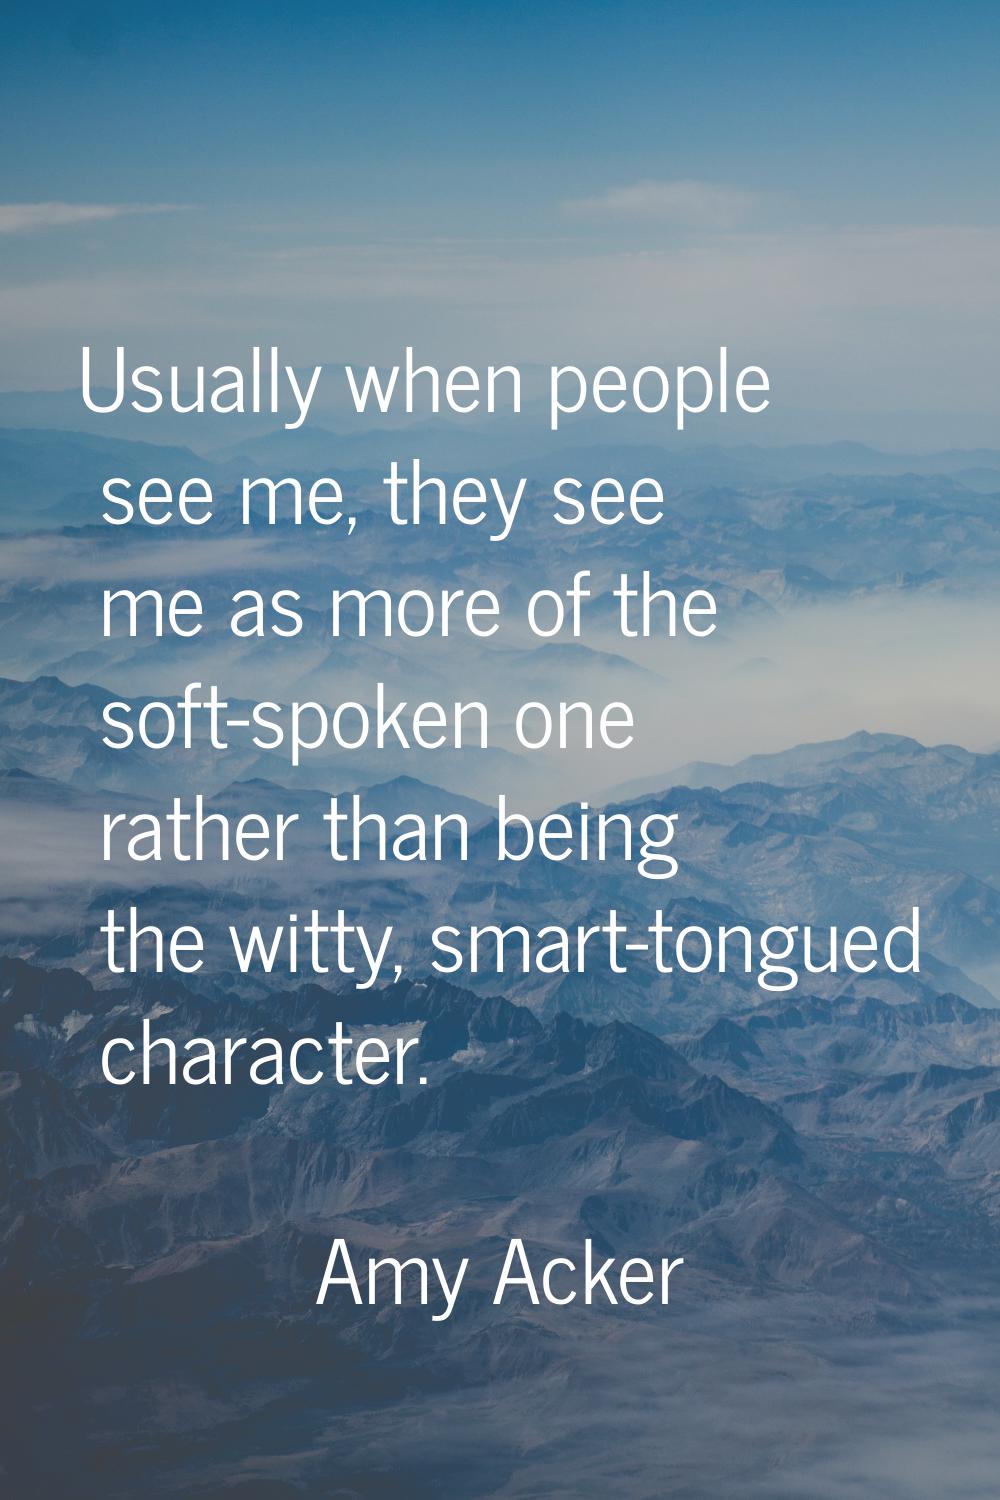 Usually when people see me, they see me as more of the soft-spoken one rather than being the witty,